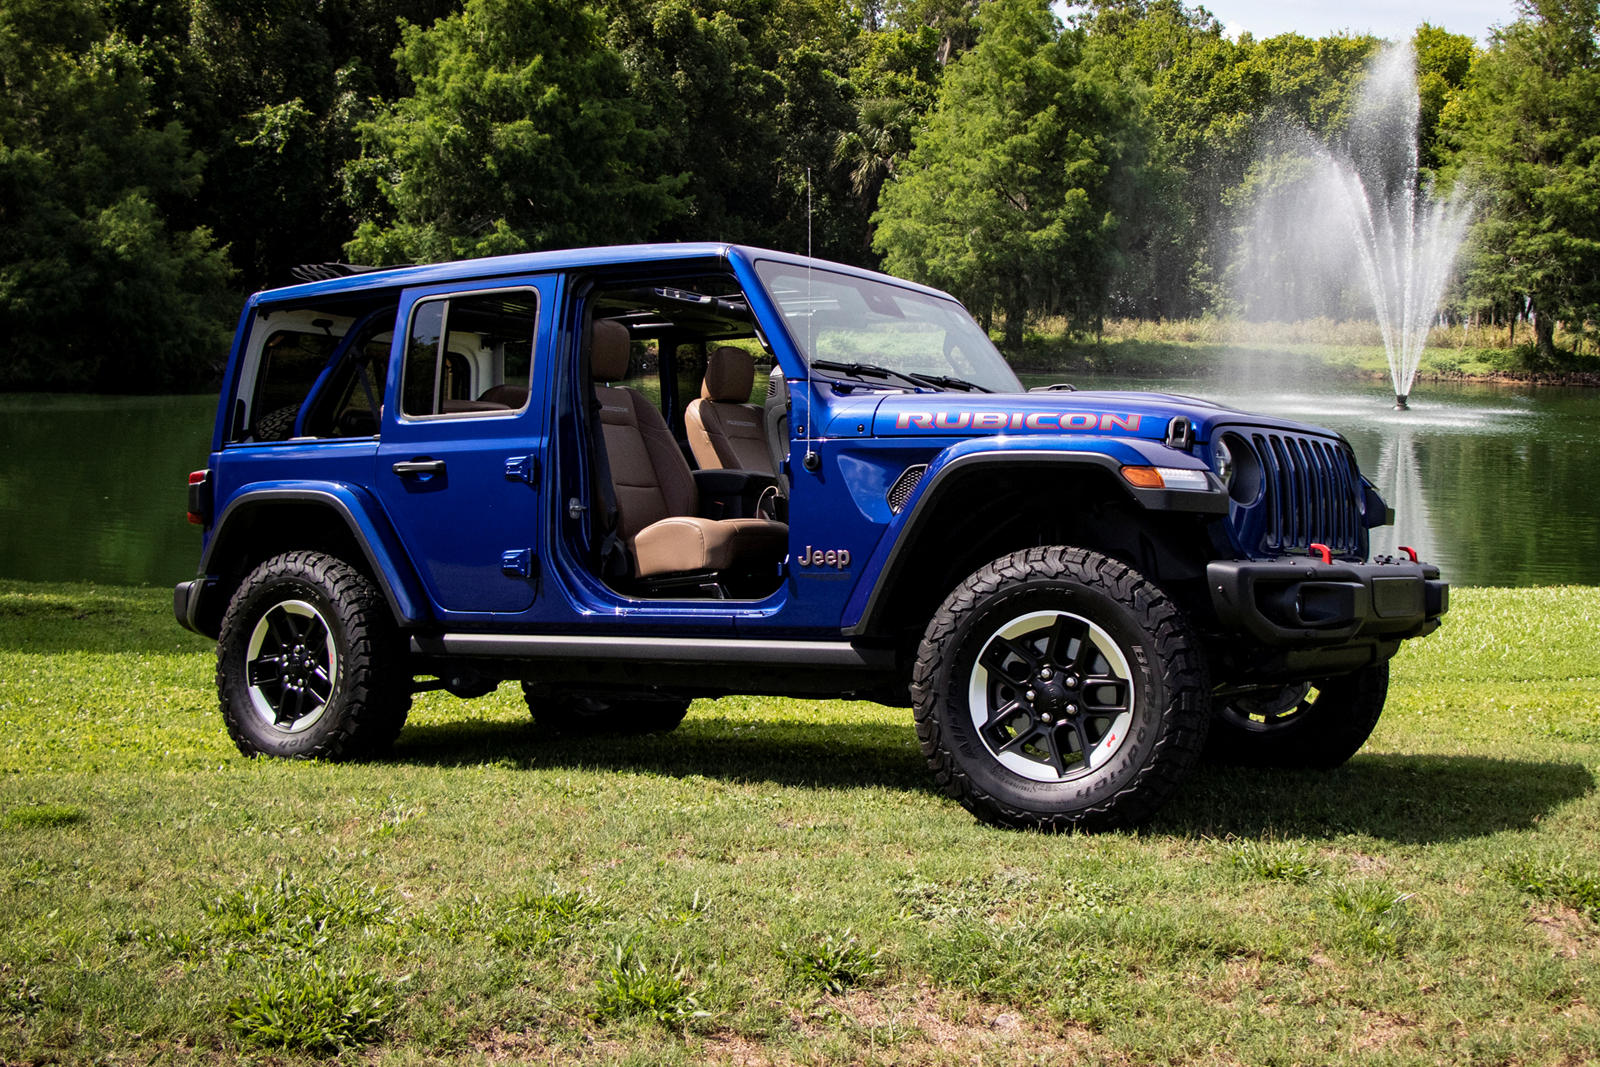 5 Awesome Features Of The 2020 Jeep Wrangler Unlimited | CarBuzz